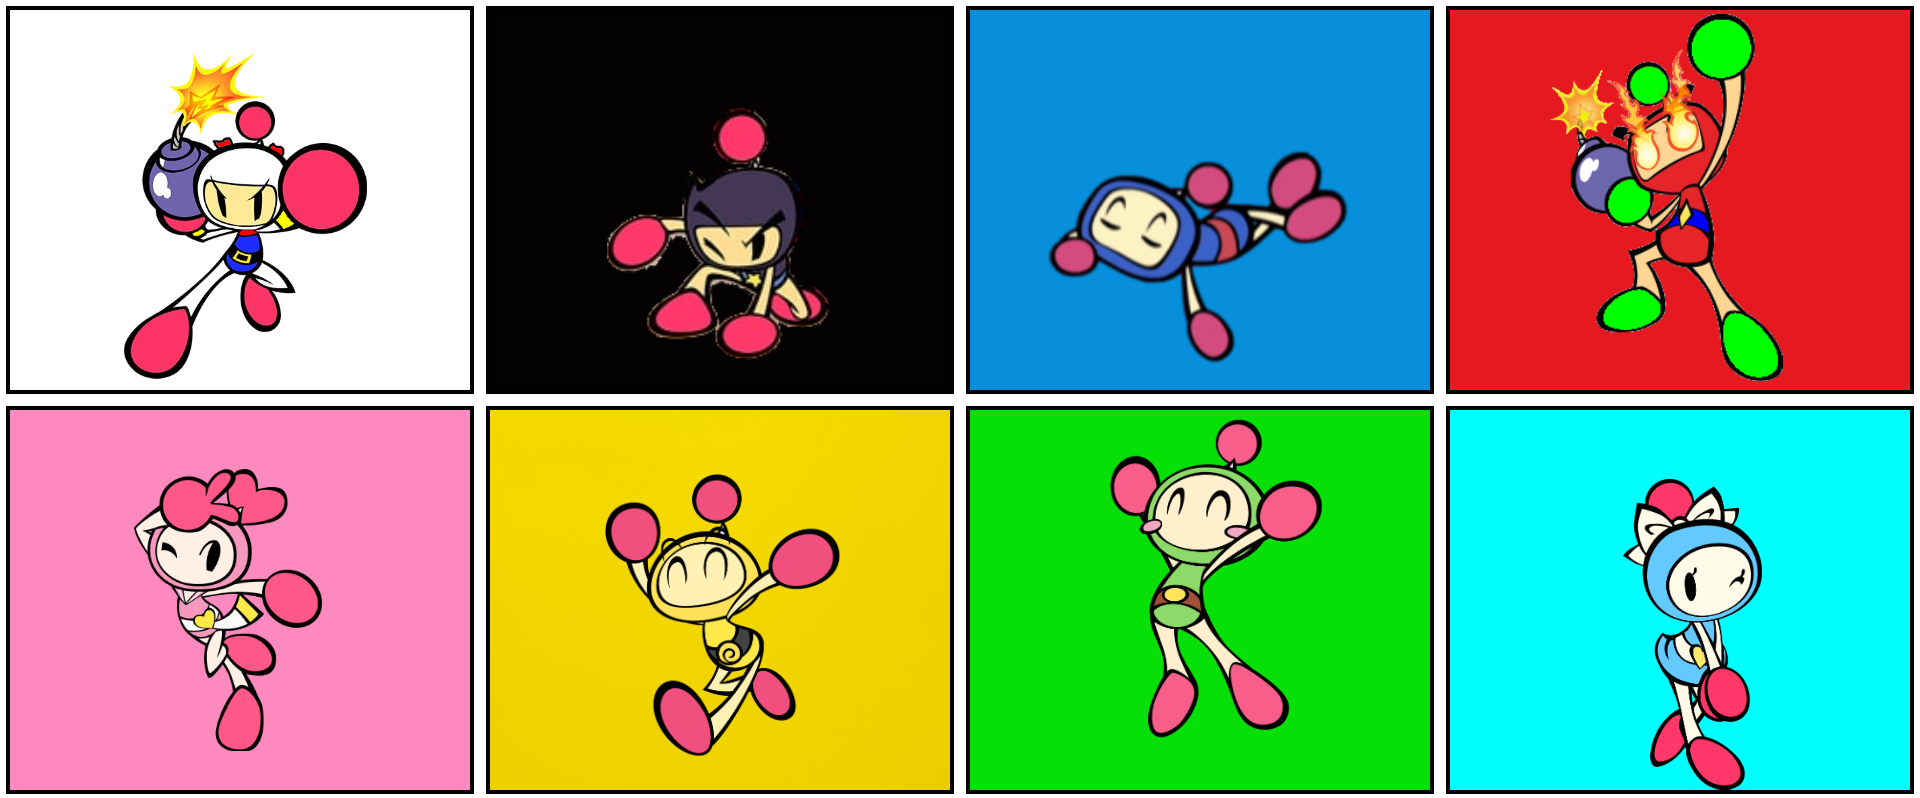 Bomberman Bros with their background colors Blank Meme Template